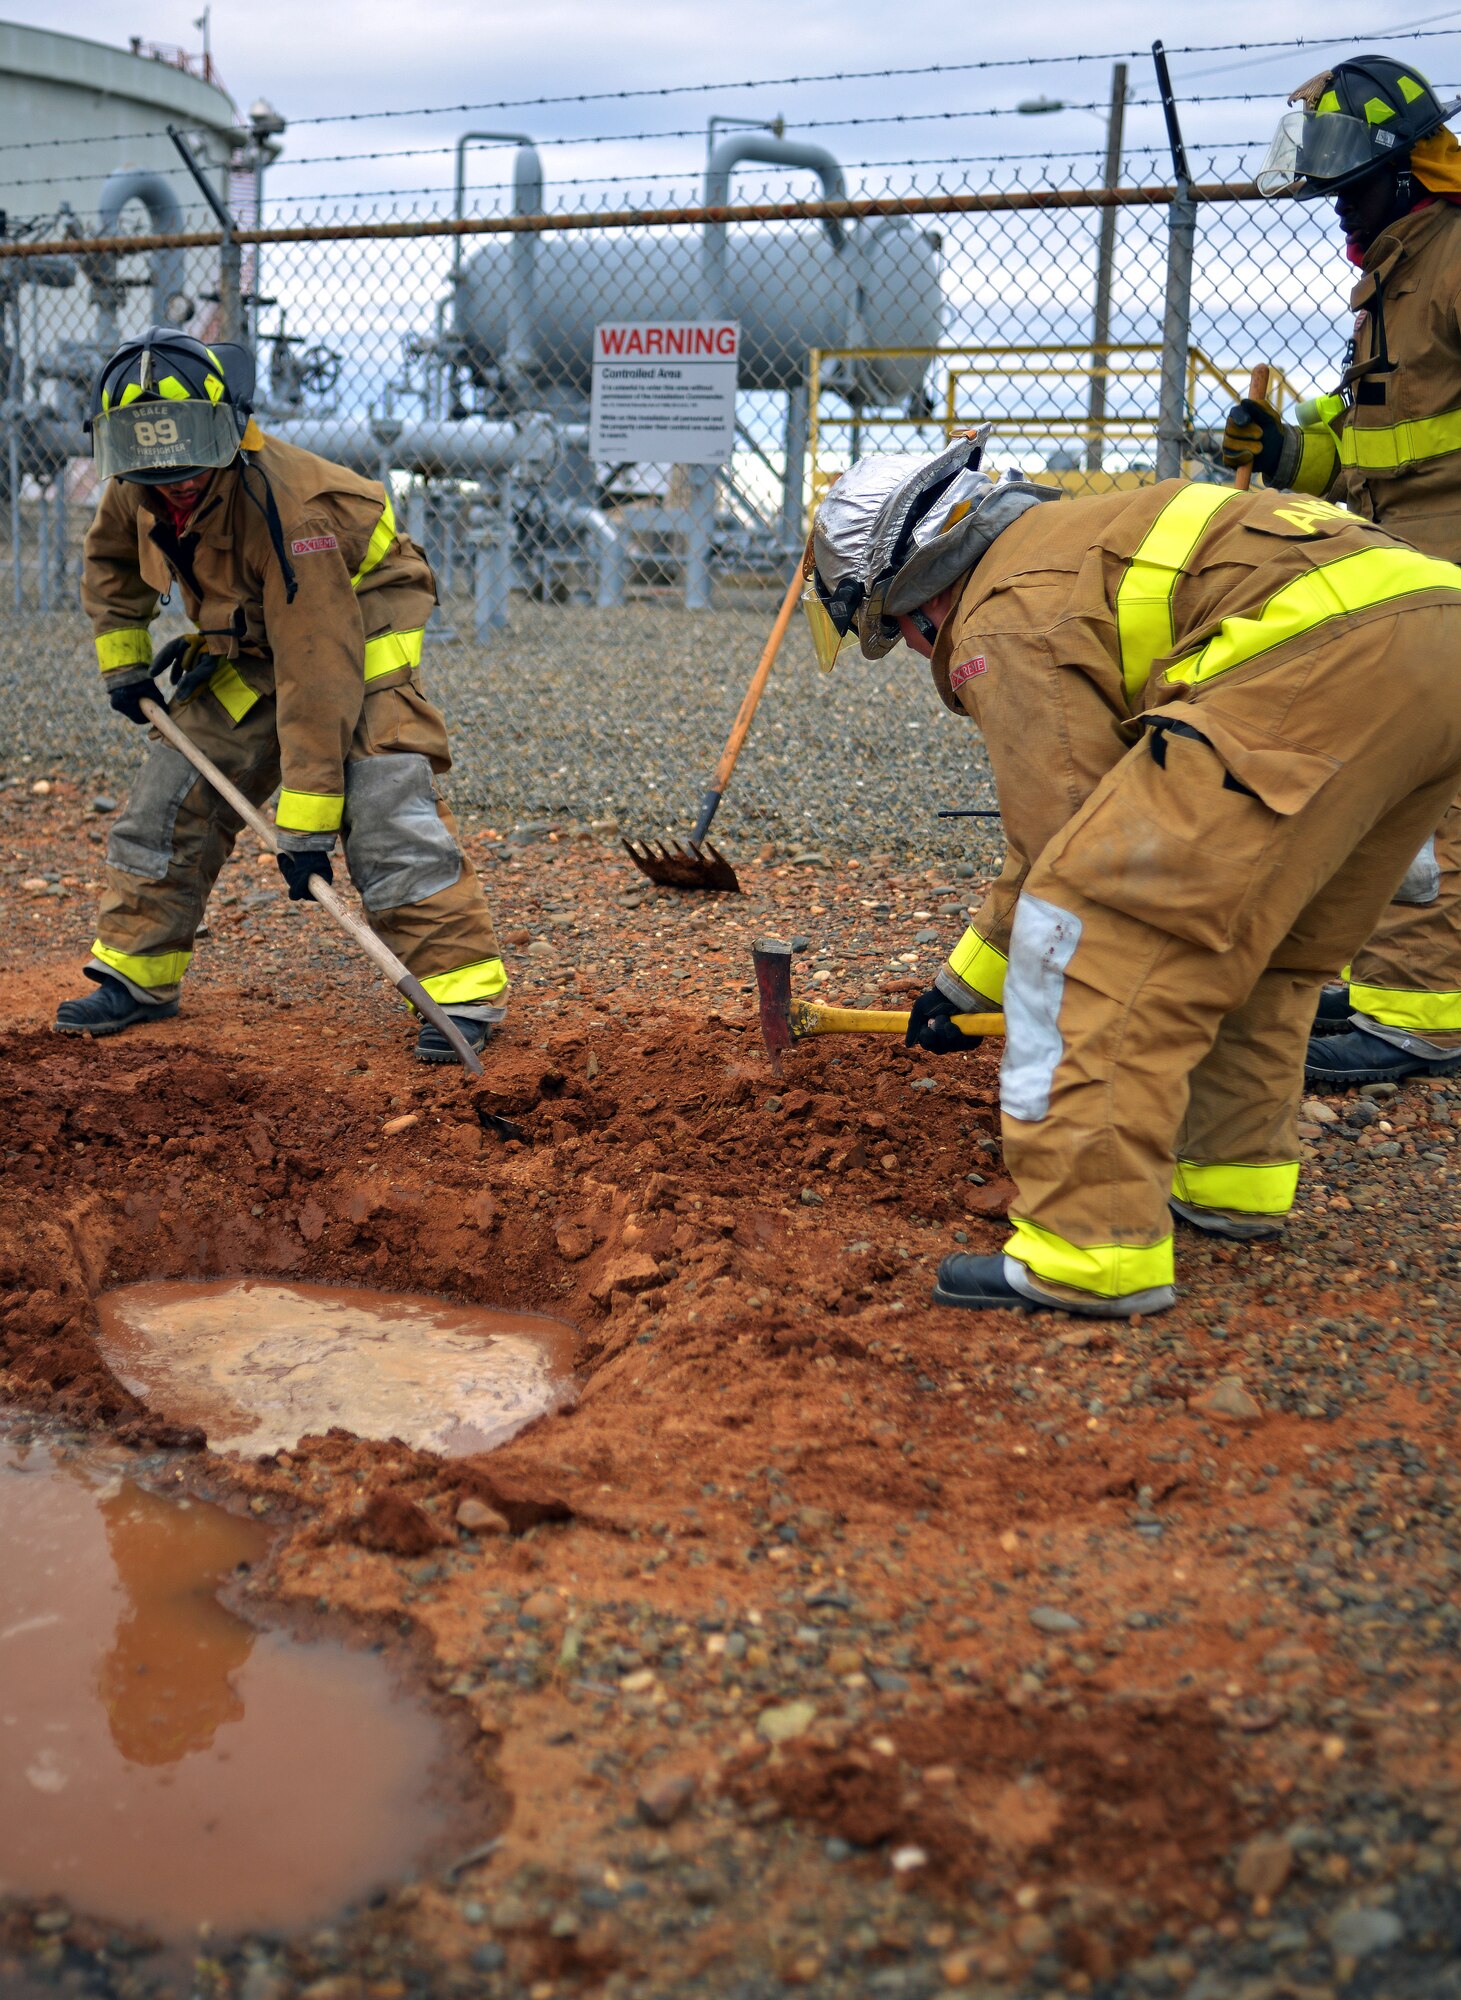 Firefighters from the 9th Civil Engineering Squadron work to contain a simulated JPTS fuel spill on Beale Air Force Base, Calif., March 28, 2013. (U.S. Air Force photo by Airman 1st Class Drew Buchanan/Released)